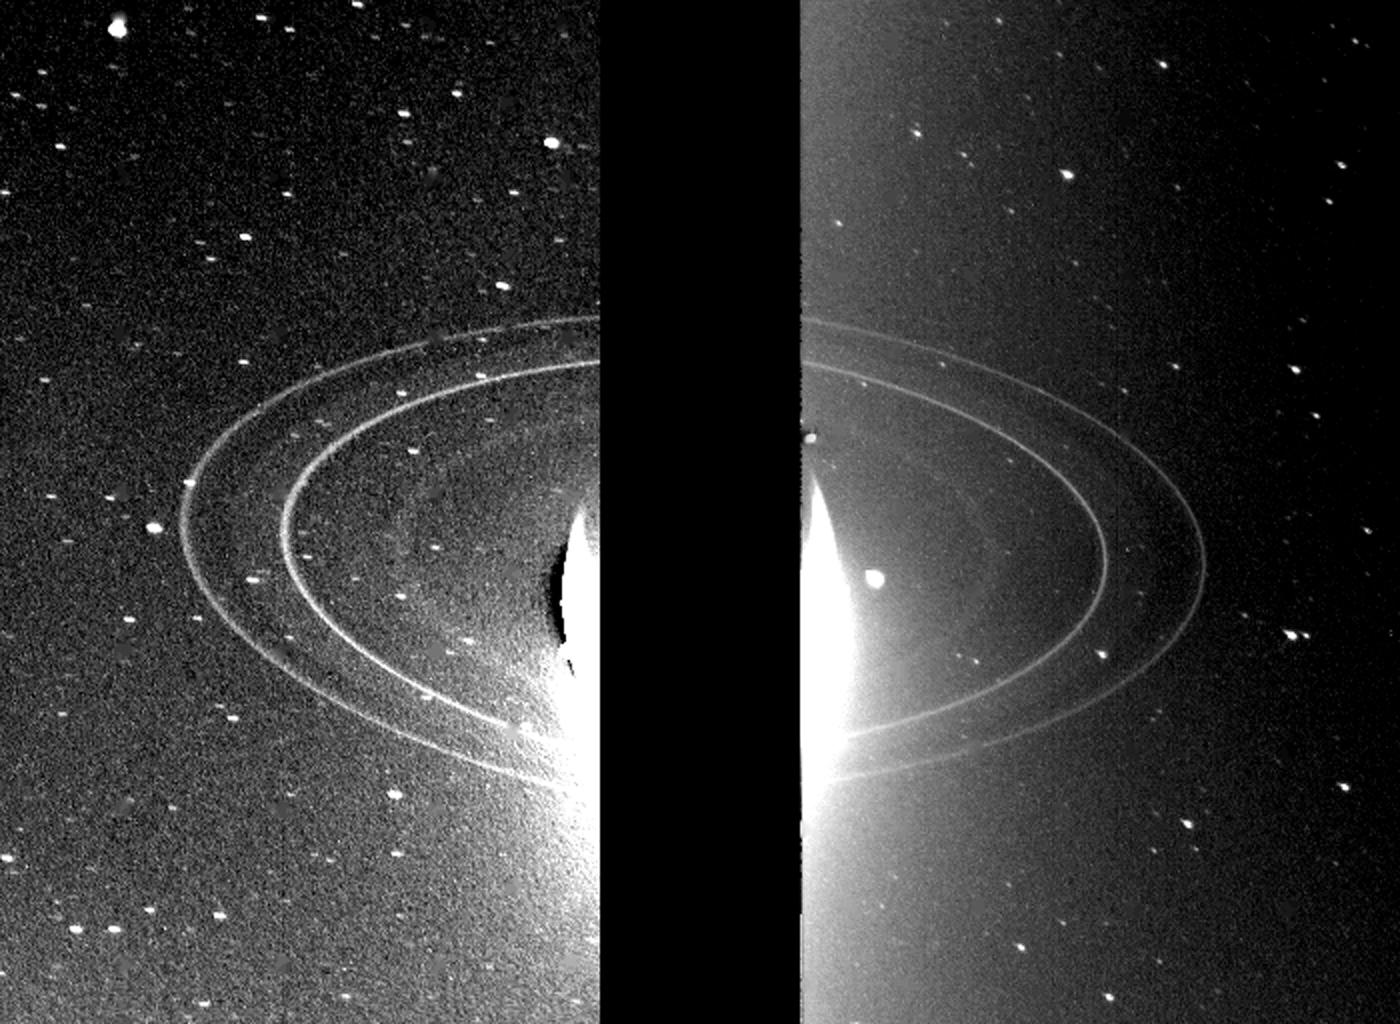 These two 591-second exposures of the rings of Neptune were taken with the clear filter by the NASA's Voyager 2 wide-angle camera on Aug. 26, 1989. The two main rings are clearly visible and appear complete over the region imaged. 
